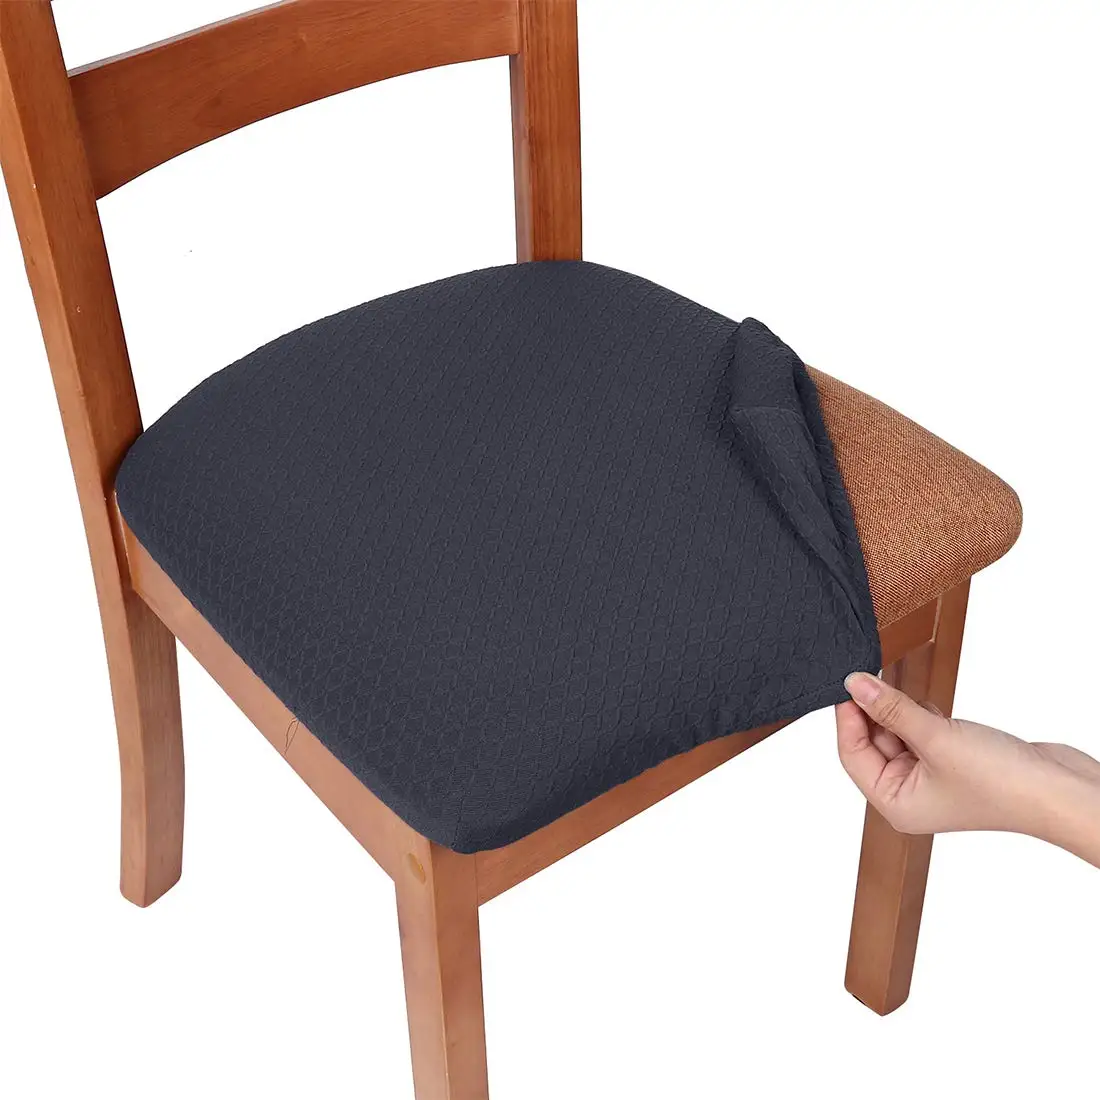 Stretch Jacquard Chair Dining Room Upholstered Spandex Chair Seat Cover Buy Chair Cover